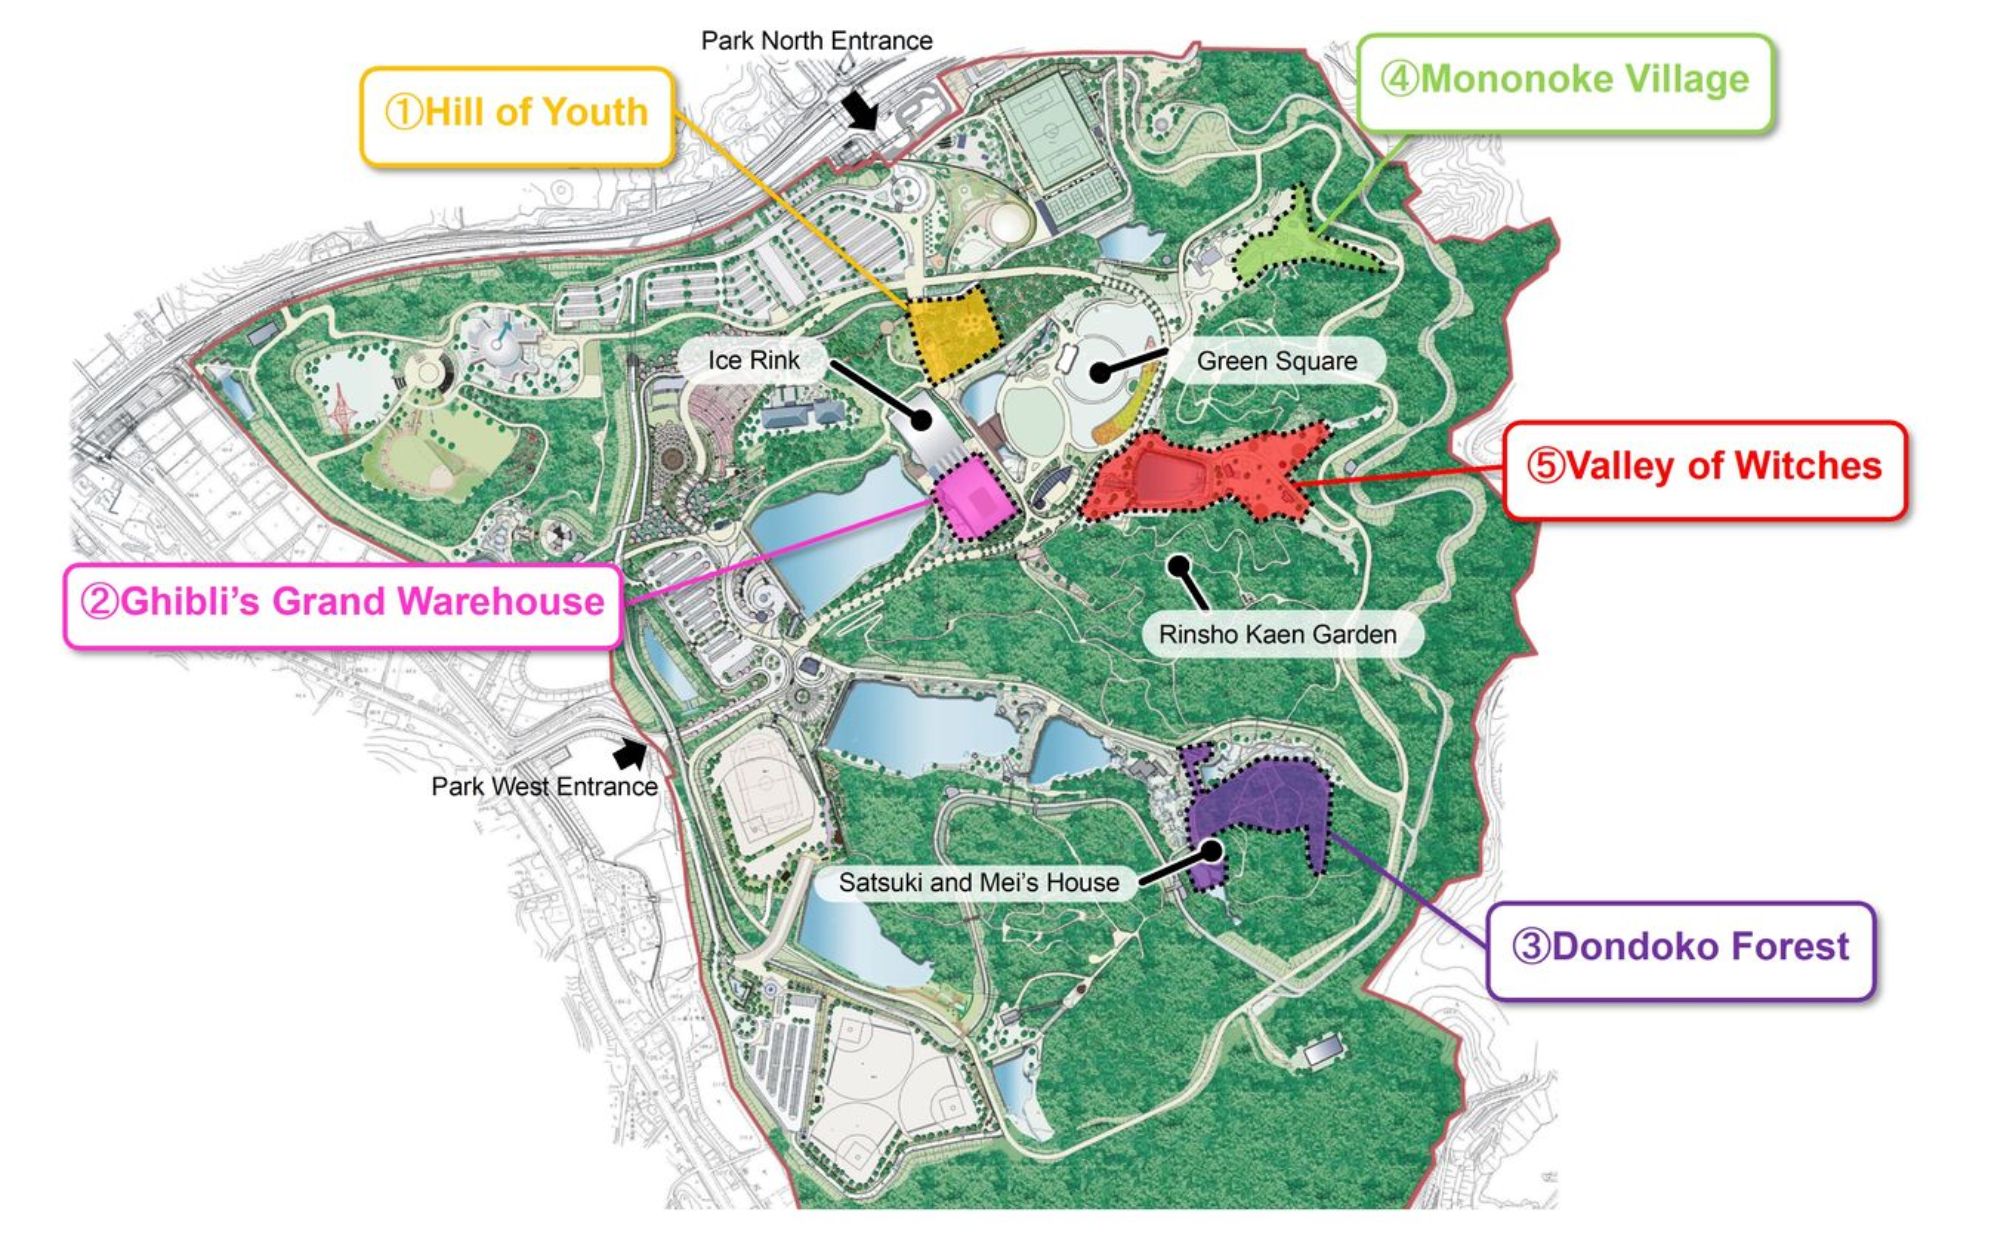 A photo of the Studio Ghibli theme park map, with color coding indicating the five areas